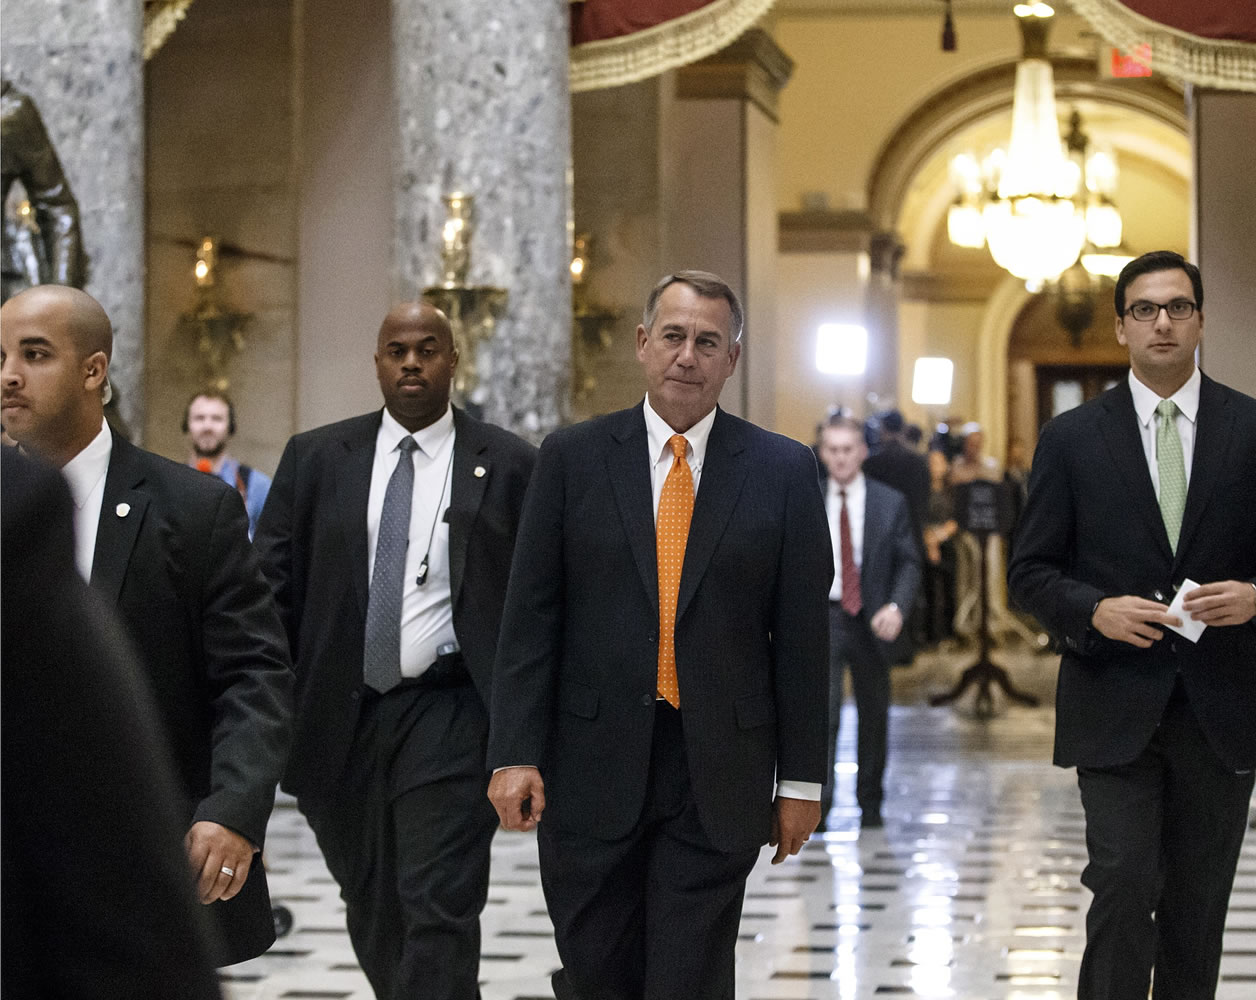 House Speaker John Boehner, R-Ohio, strides from the House floor on Capitol Hill in Washington on Friday after the Republican-controlled House passed legislation approving the Keystone XL oil pipeline.